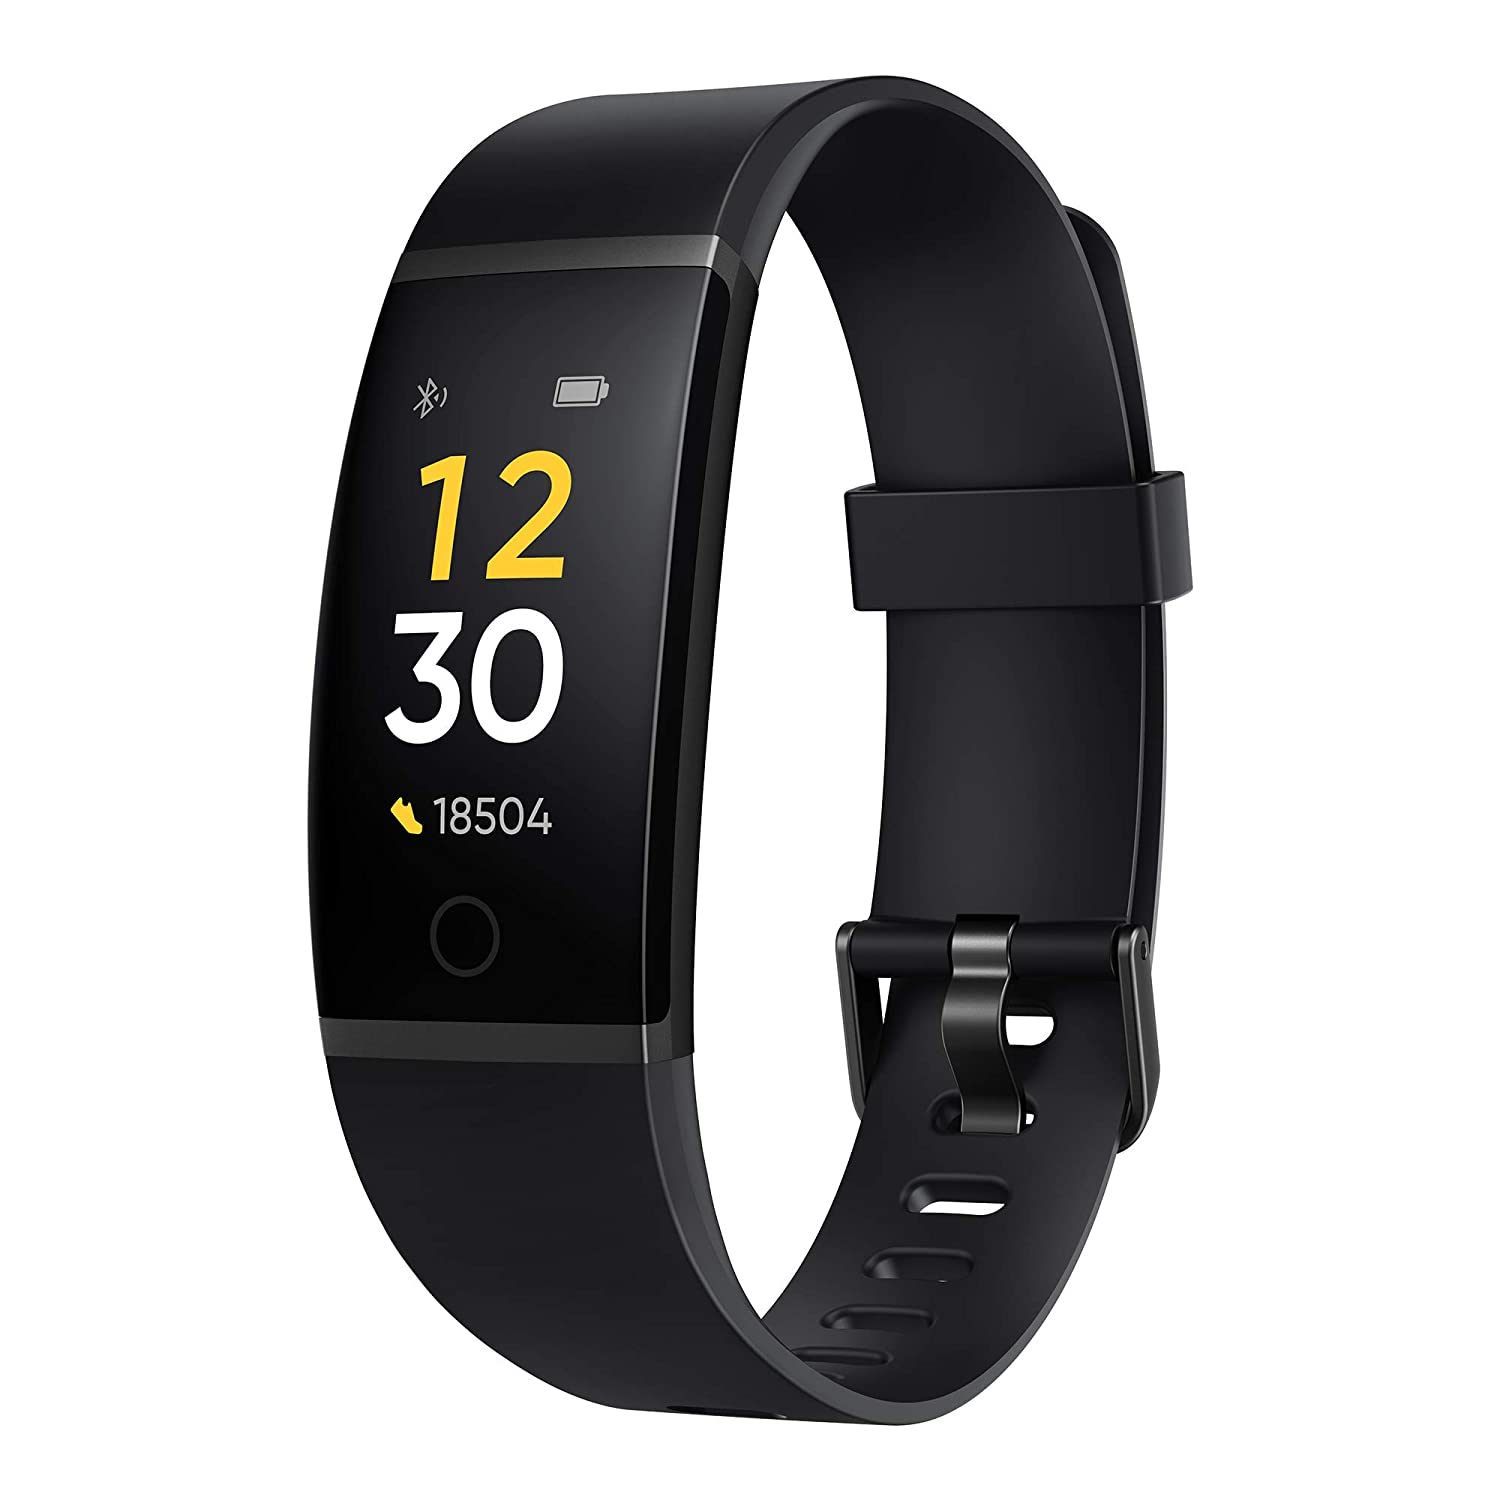 realme Band (Black) - Full Colour Screen with Touchkey, Real-time Heart  Rate Monitor, in-Built USB Charging, IP68 Water Resistant - Hungamastart